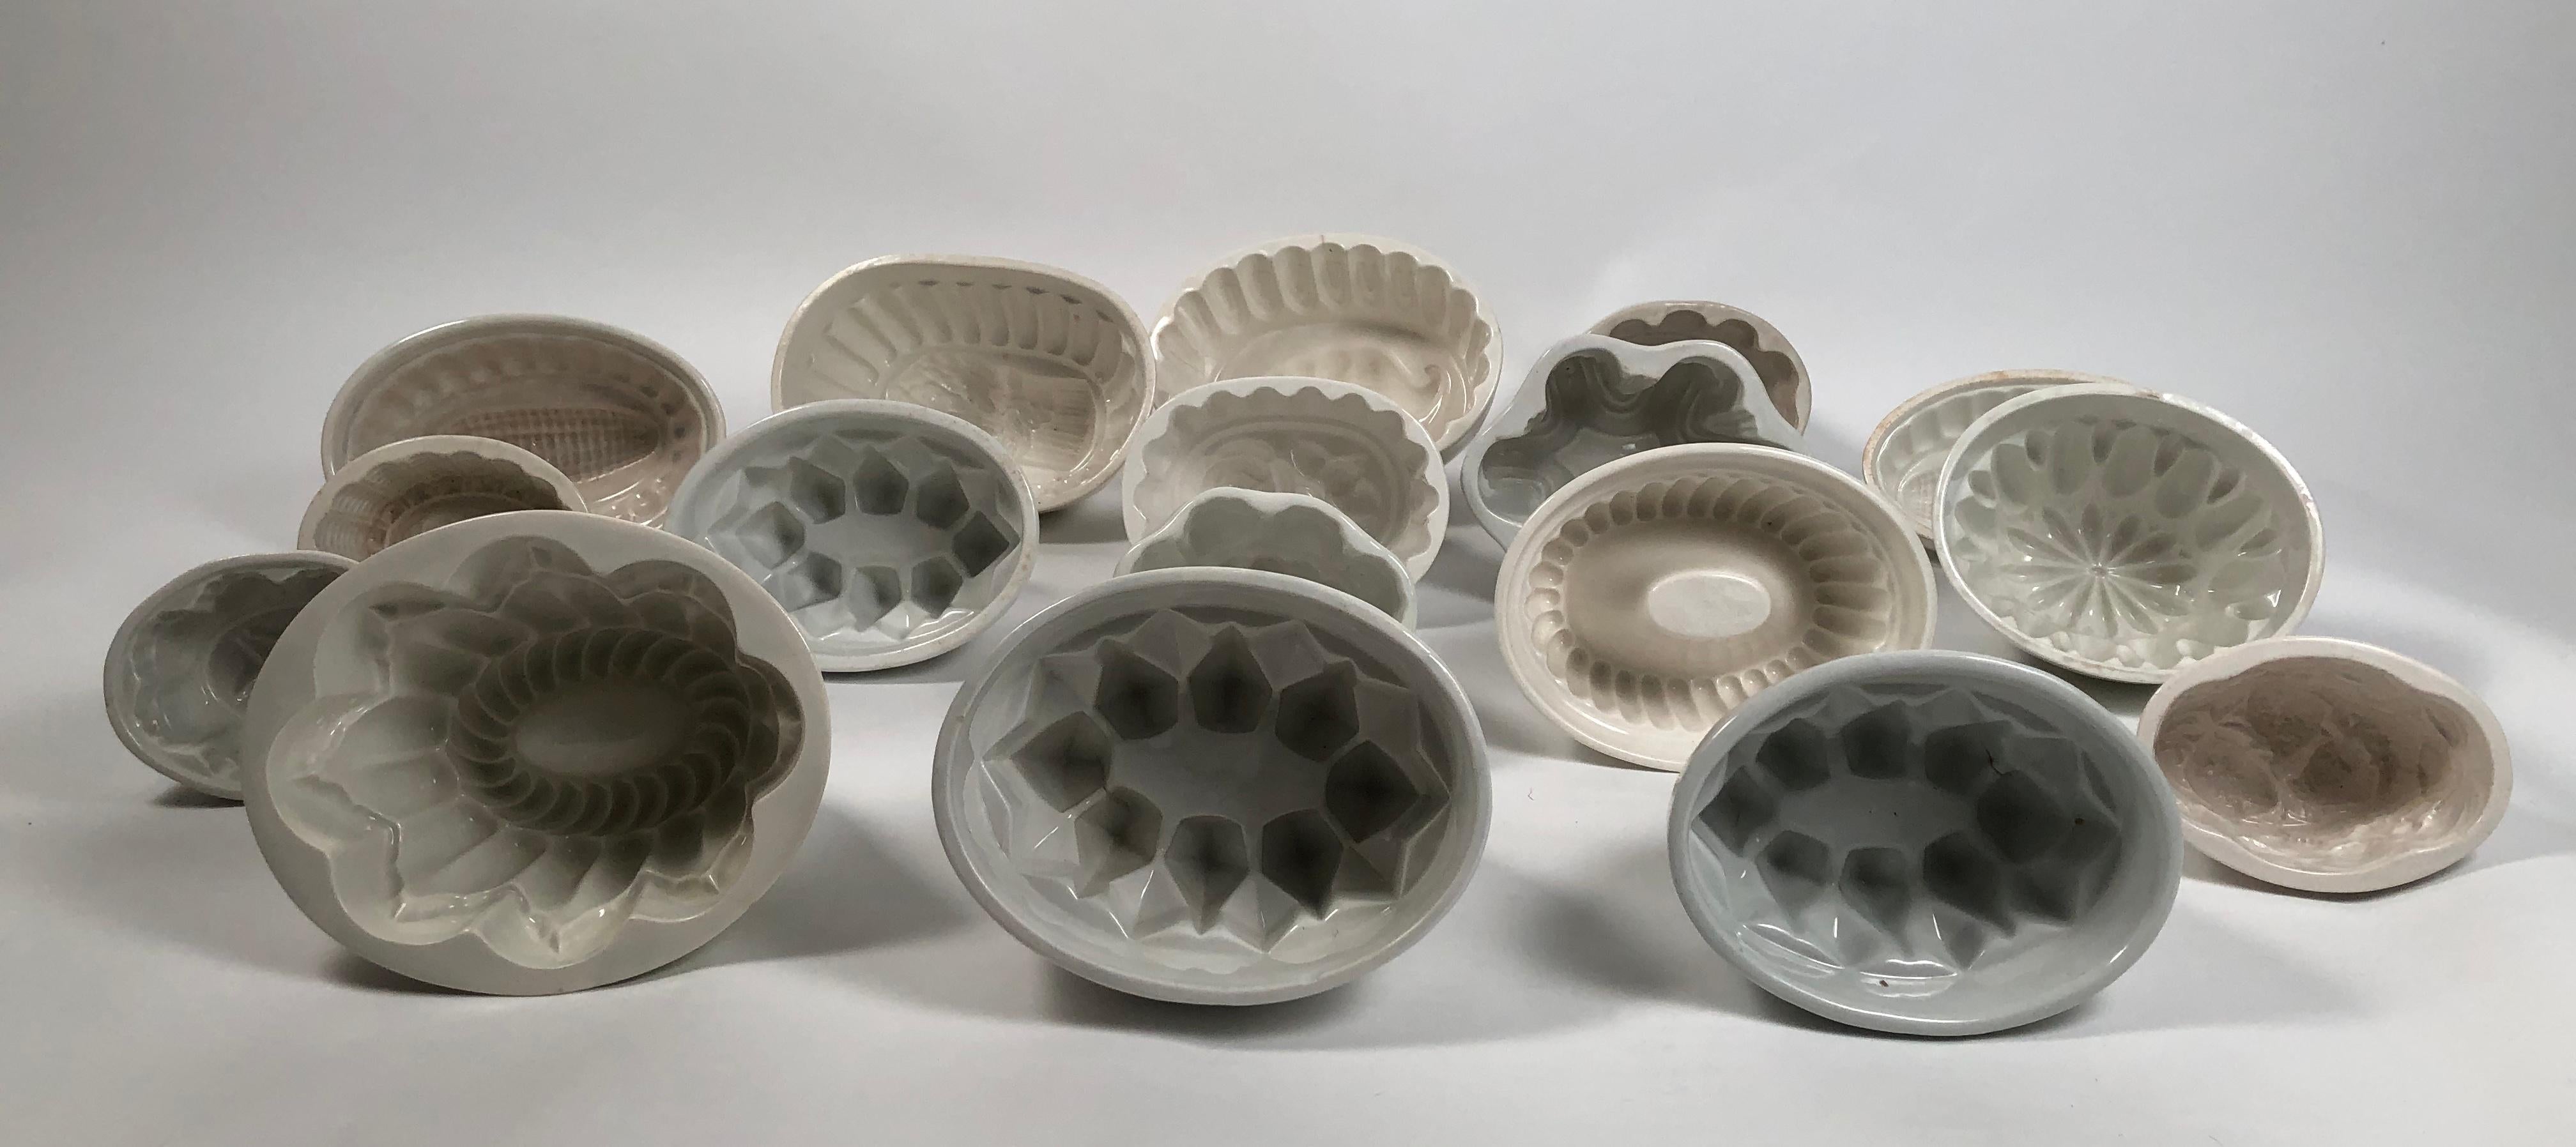 A large collection of 17 geometric English white ironstone pudding molds of various shapes and sizes. These were used for making sculptural culinary specialties--mousses, aspics, steamed puddings, etc. Wonderfully graphic and varied, these stoneware